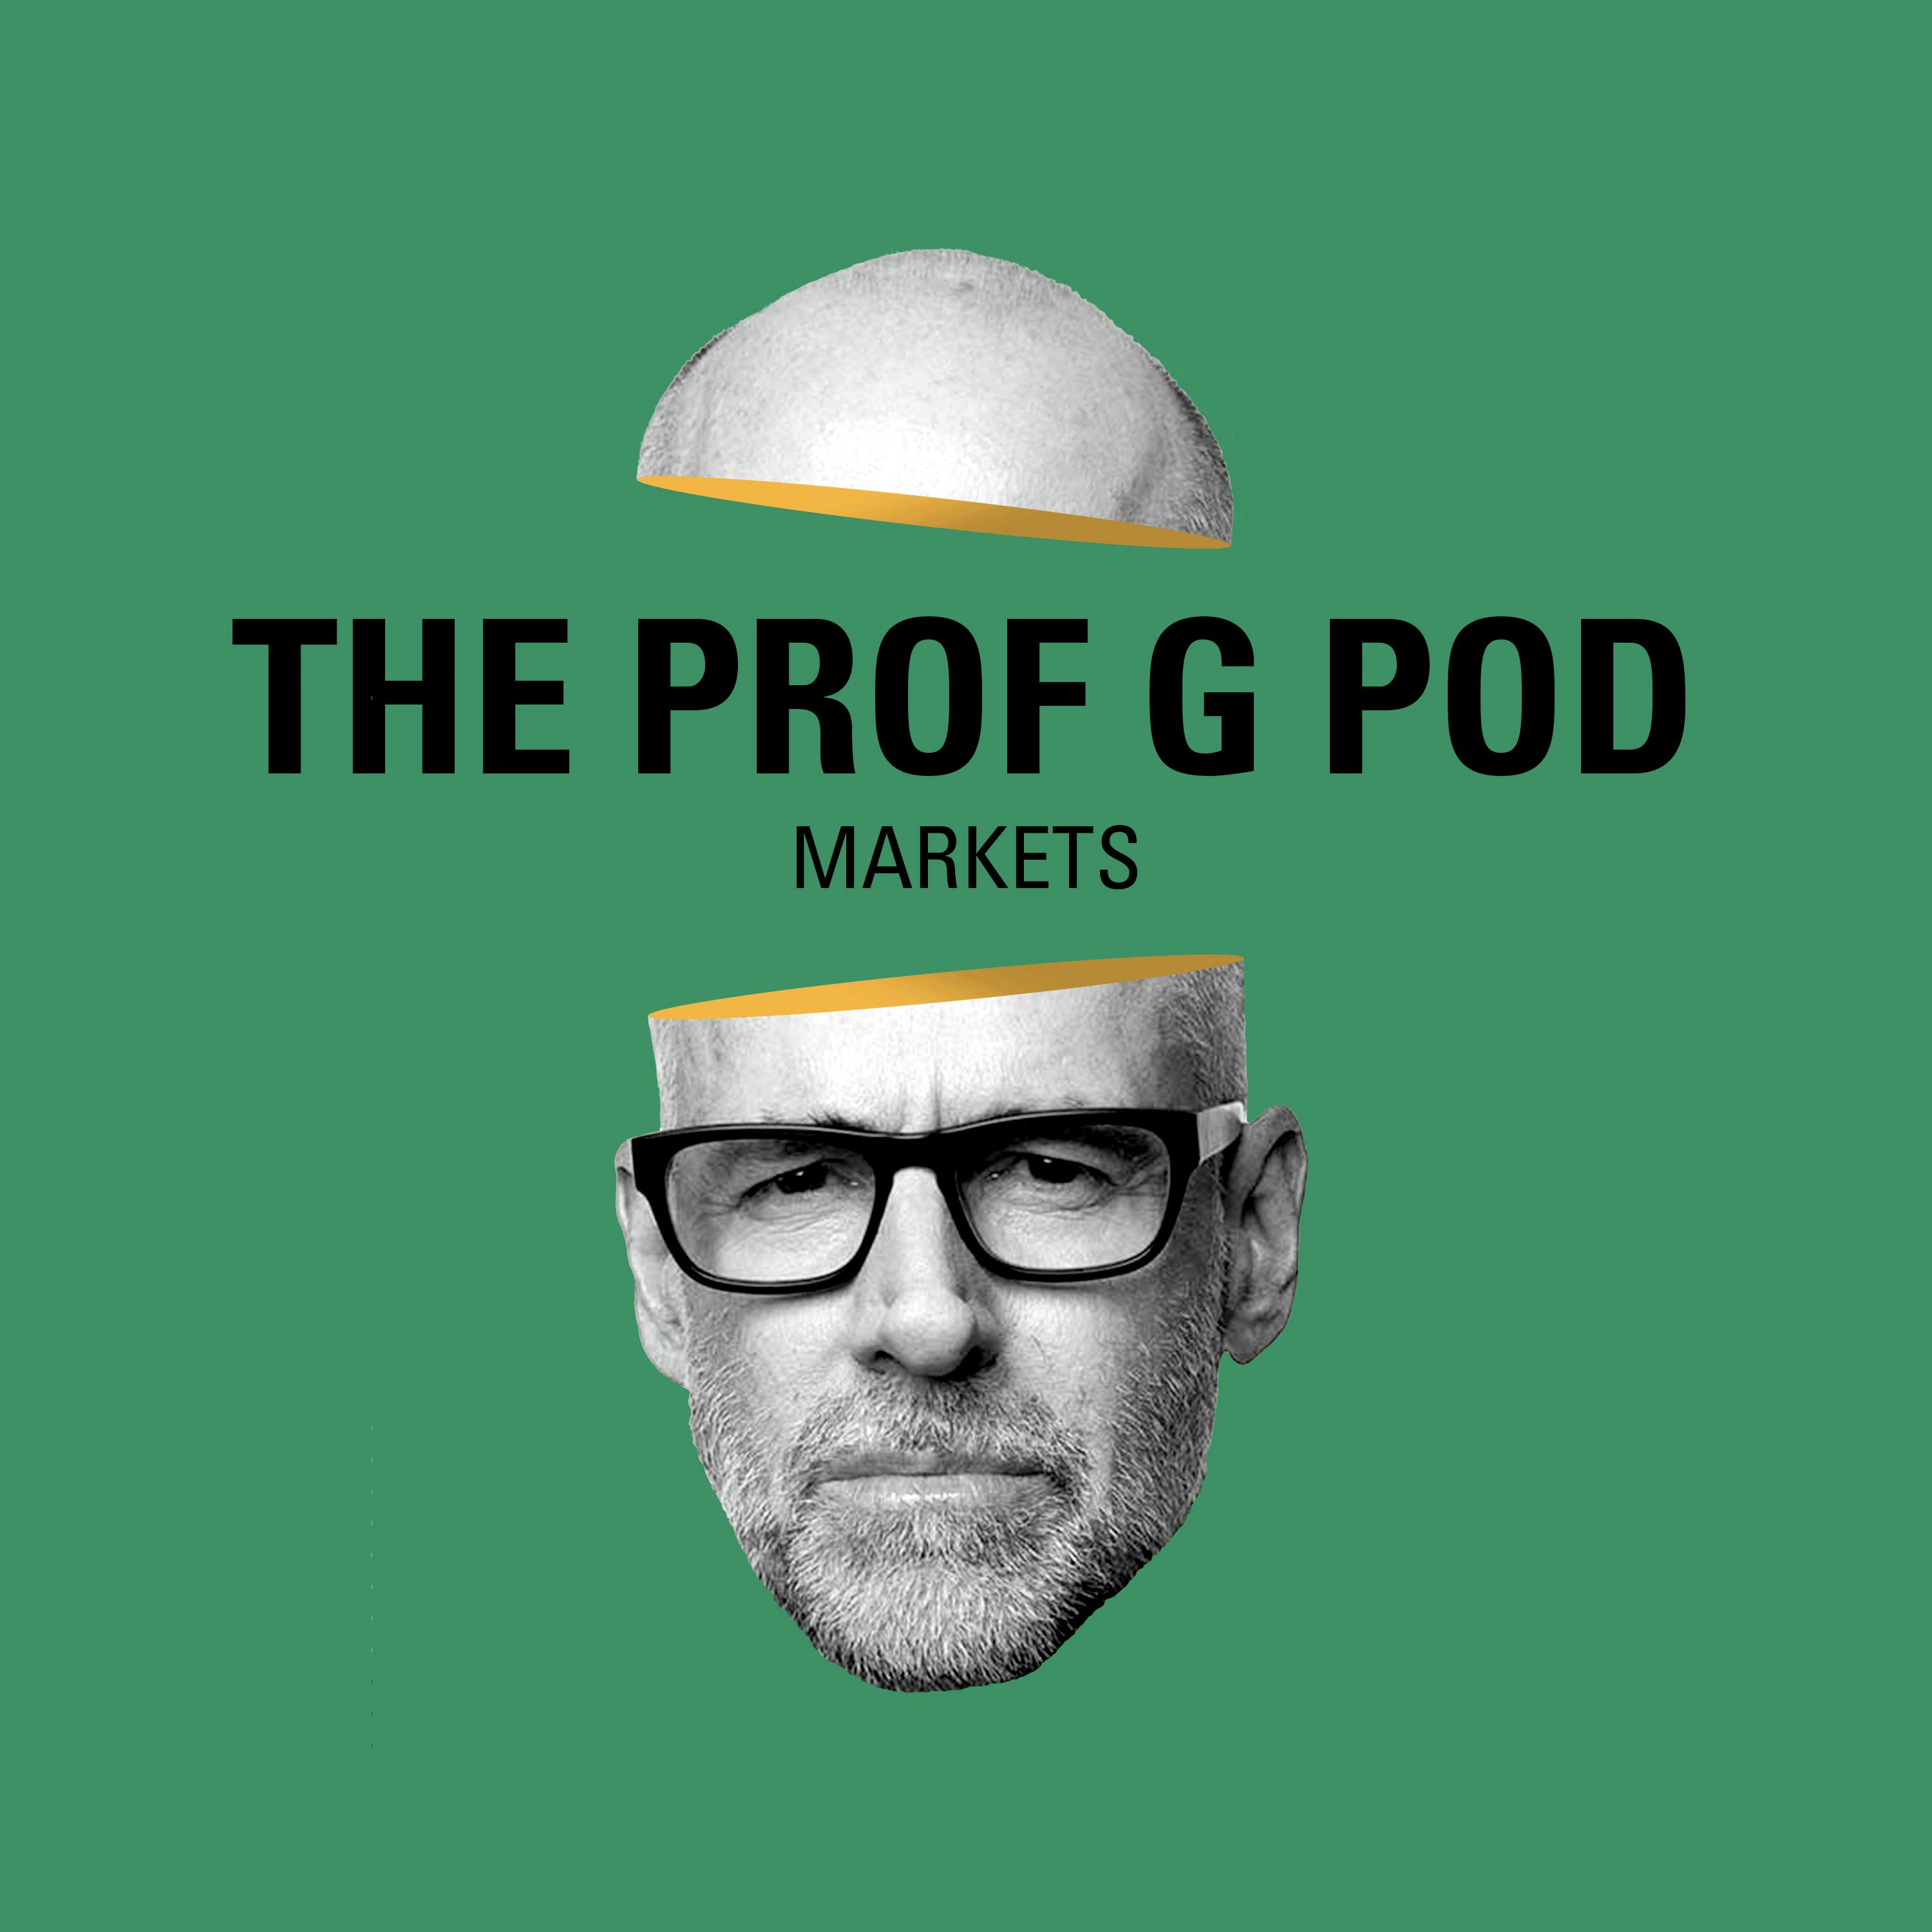 Prof G Markets: Nvidia’s Superpower, Reddit’s Democratized IPO, & the Capital One-Discover Deal